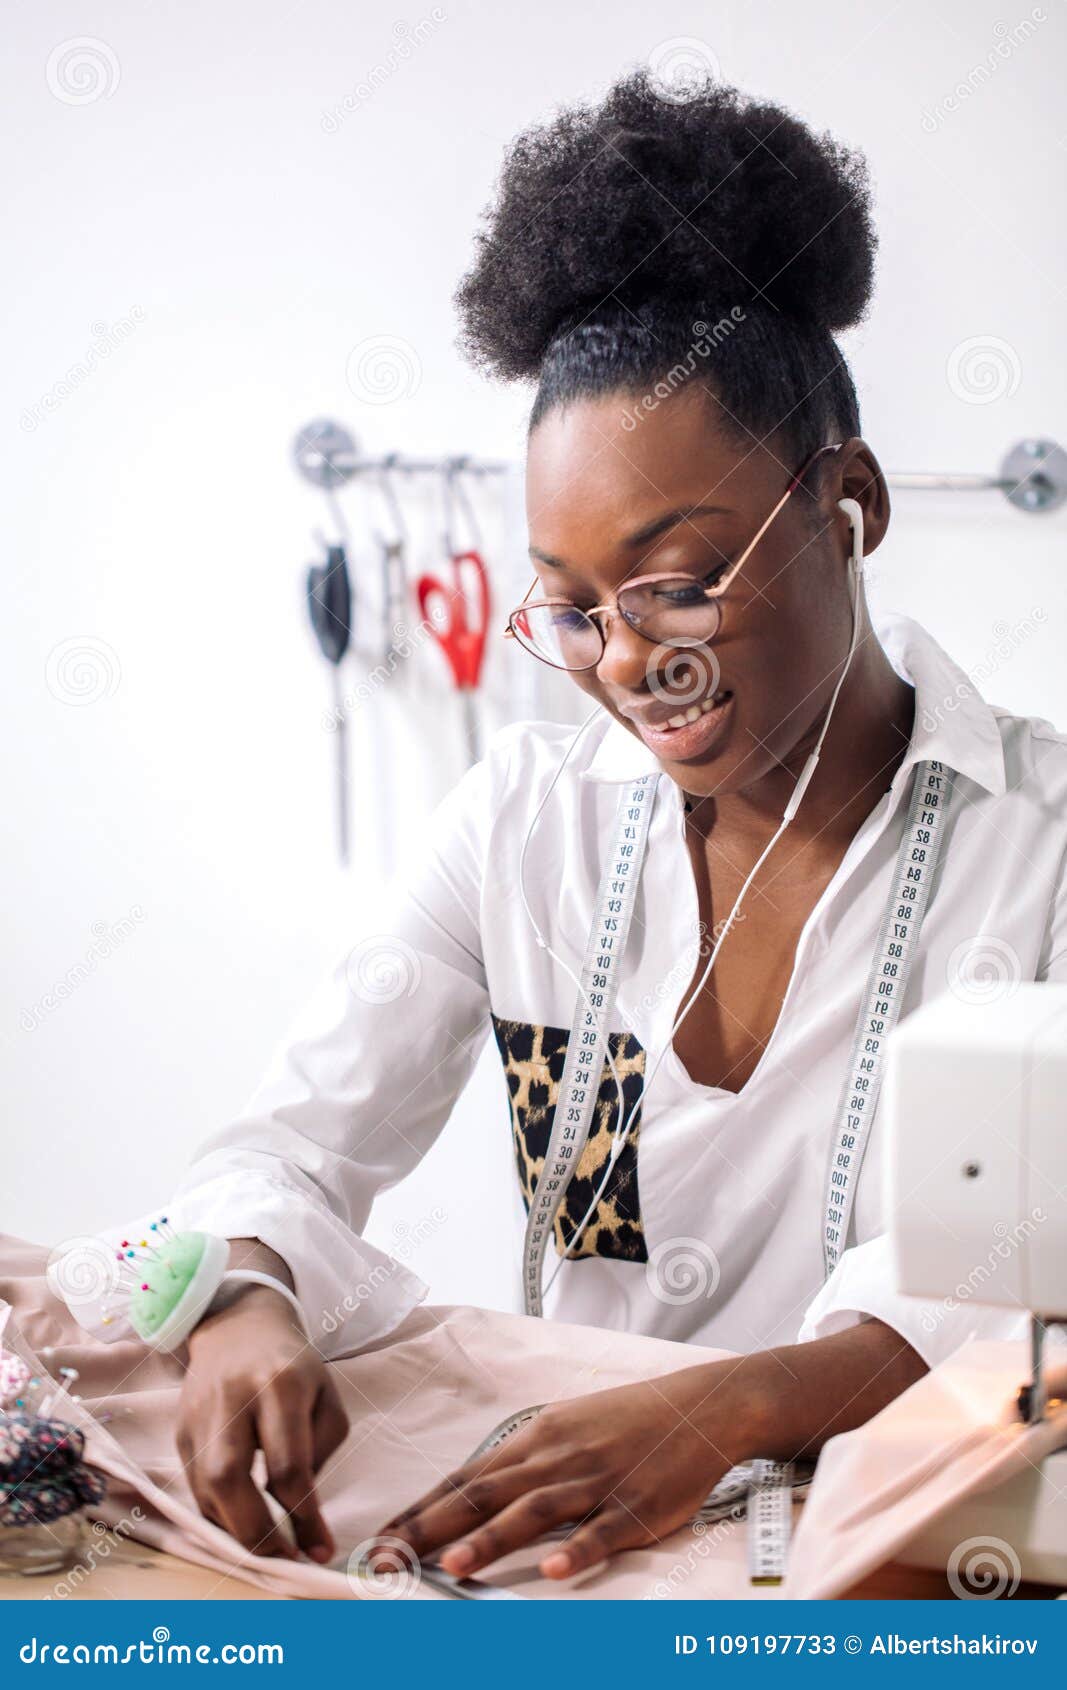 African Seamstress Working with Fabric Takes Measures Stock Image ...